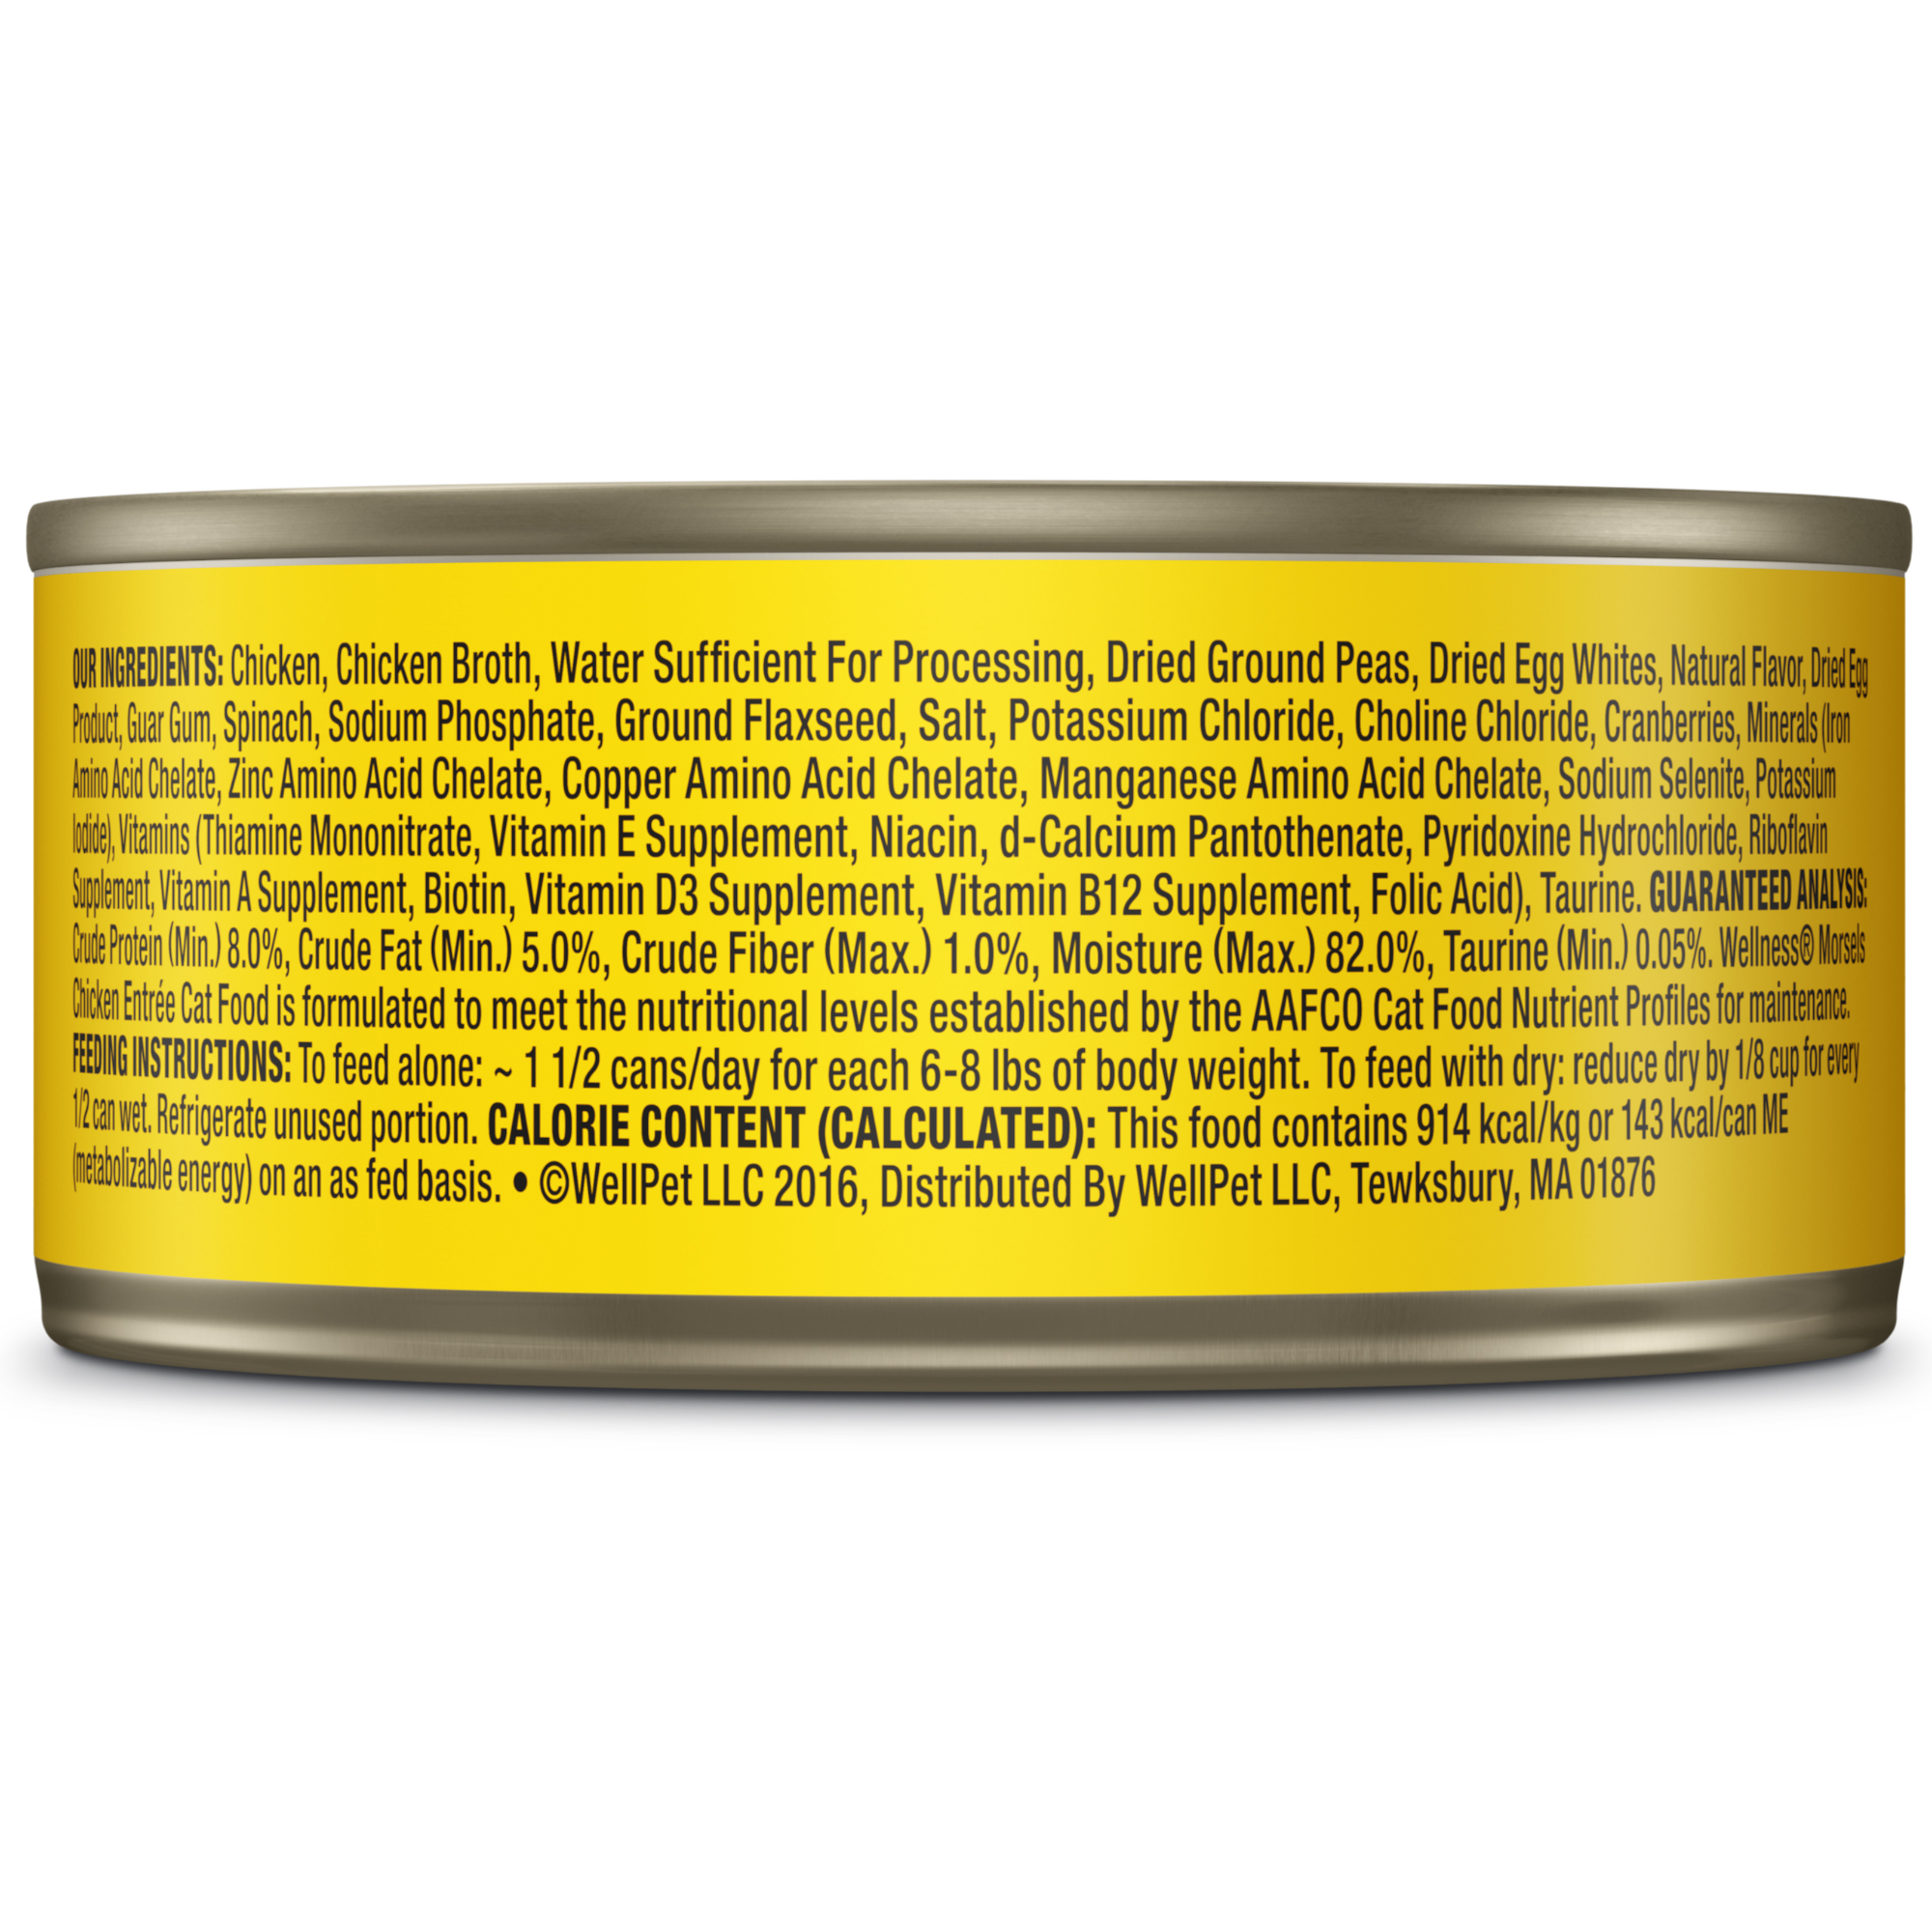 Wellness Complete Health Wet Canned Cat Food, Cubed Chicken Entree, 5.5oz Can (Pack of 24) - image 2 of 8